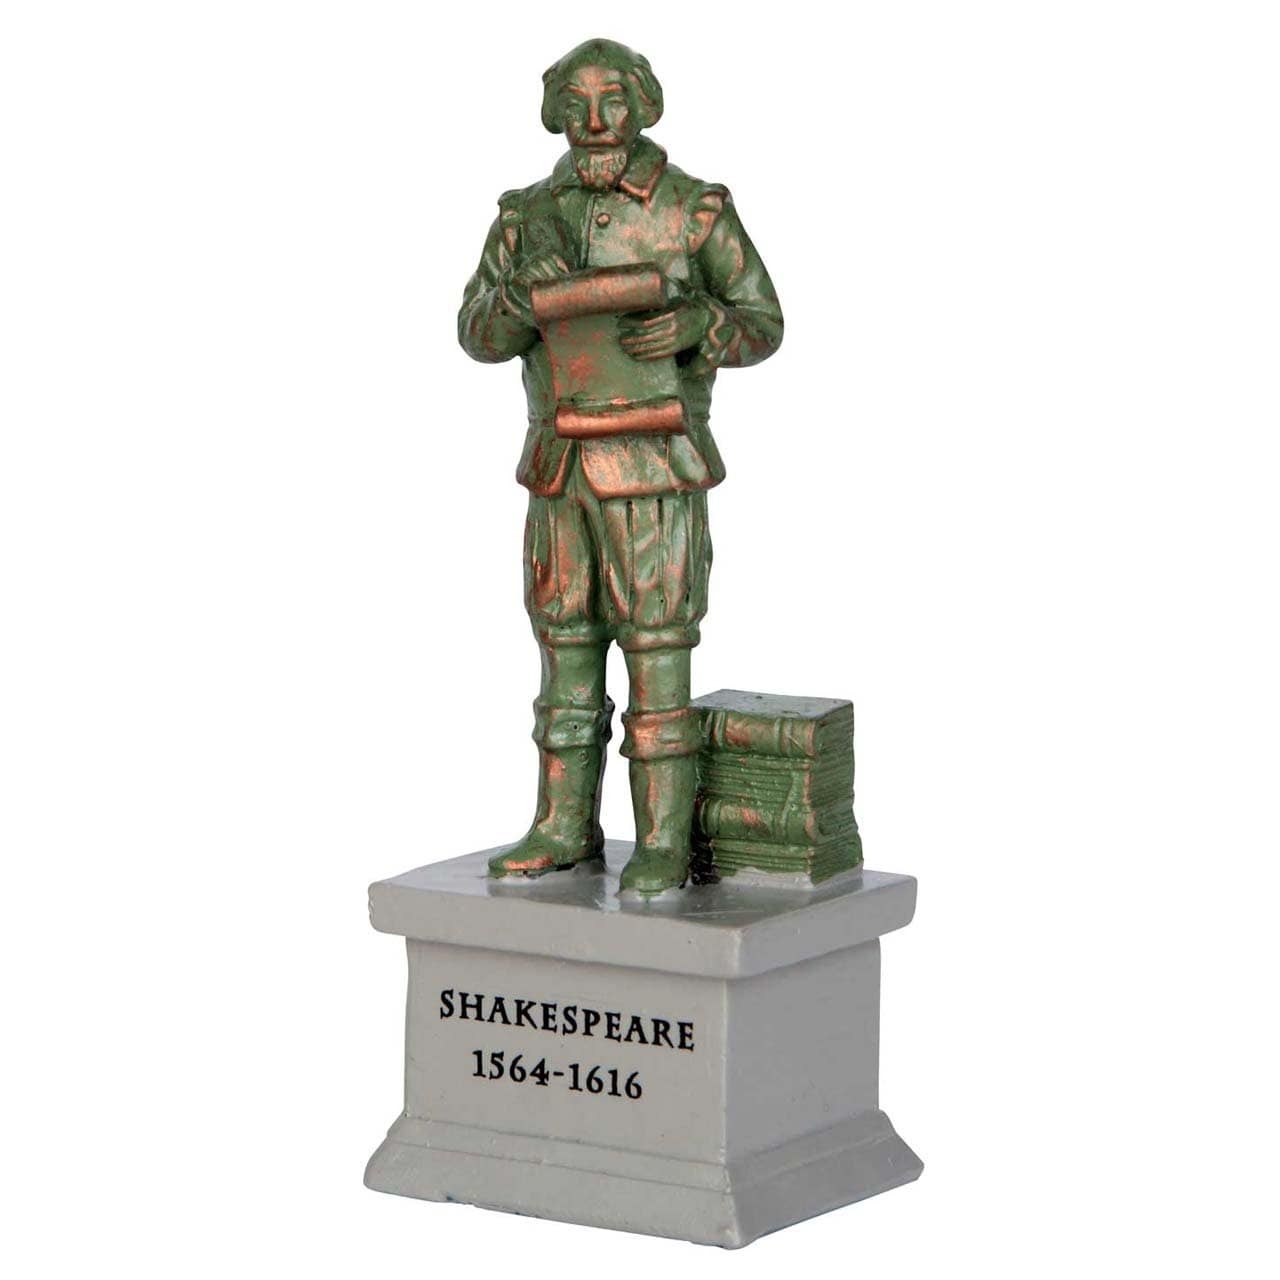 Lemax Accessory Lemax Christmas Village Accessory, Park Statue – Shakespeare